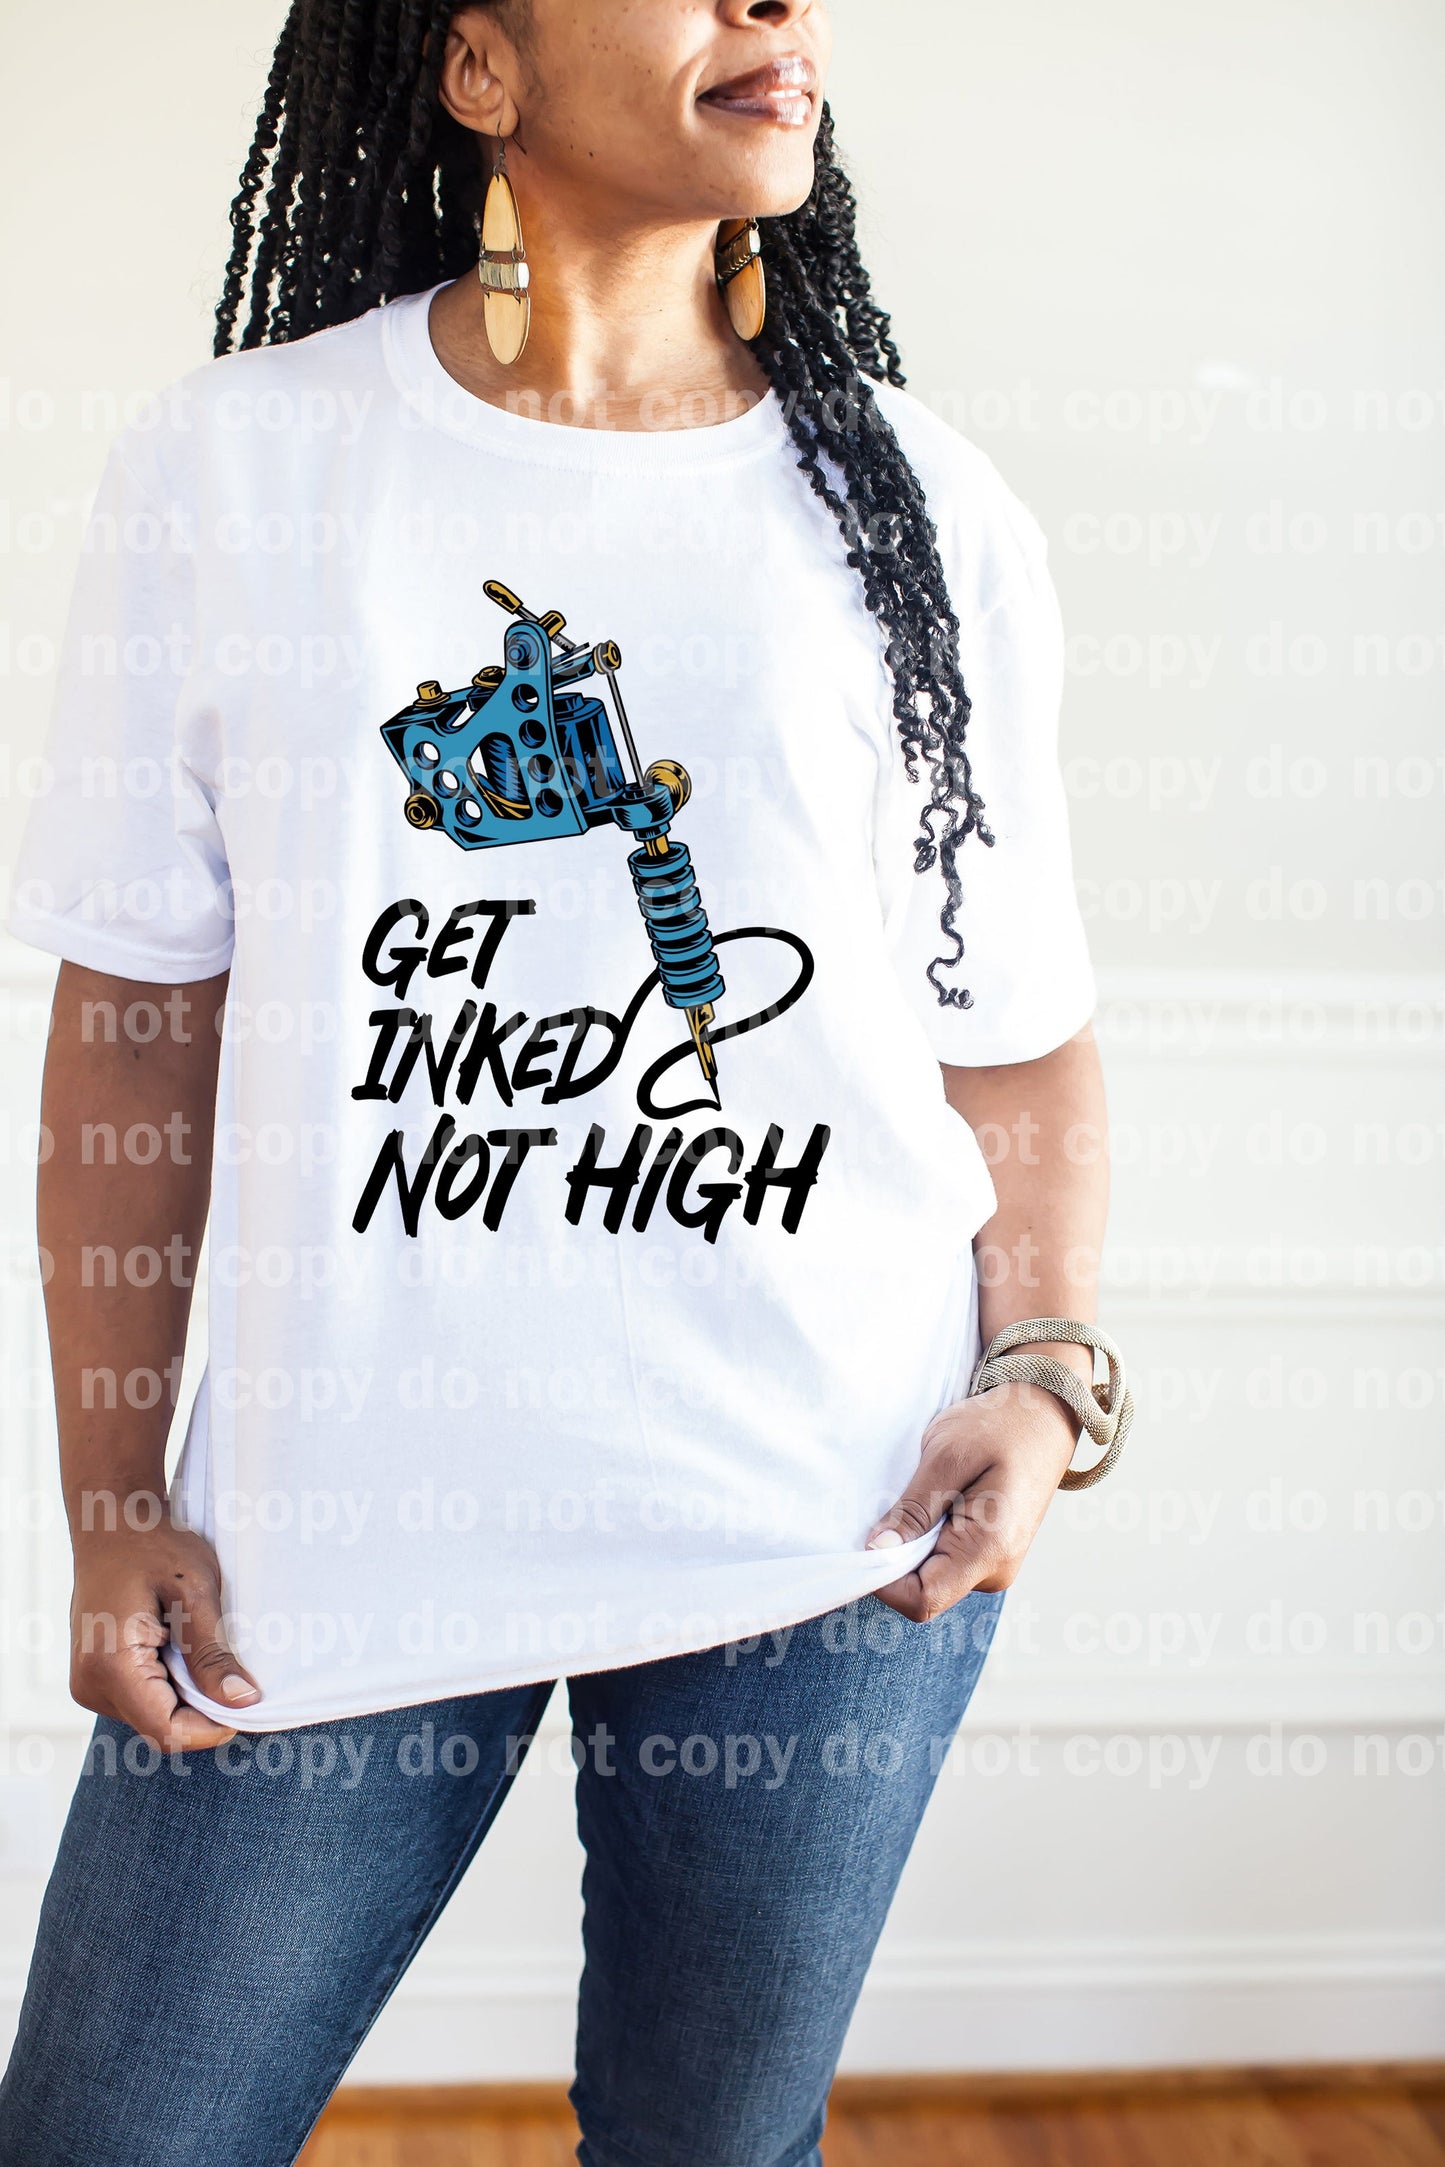 Get Inked Not High with Pocket Option Dream Print or Sublimation Print